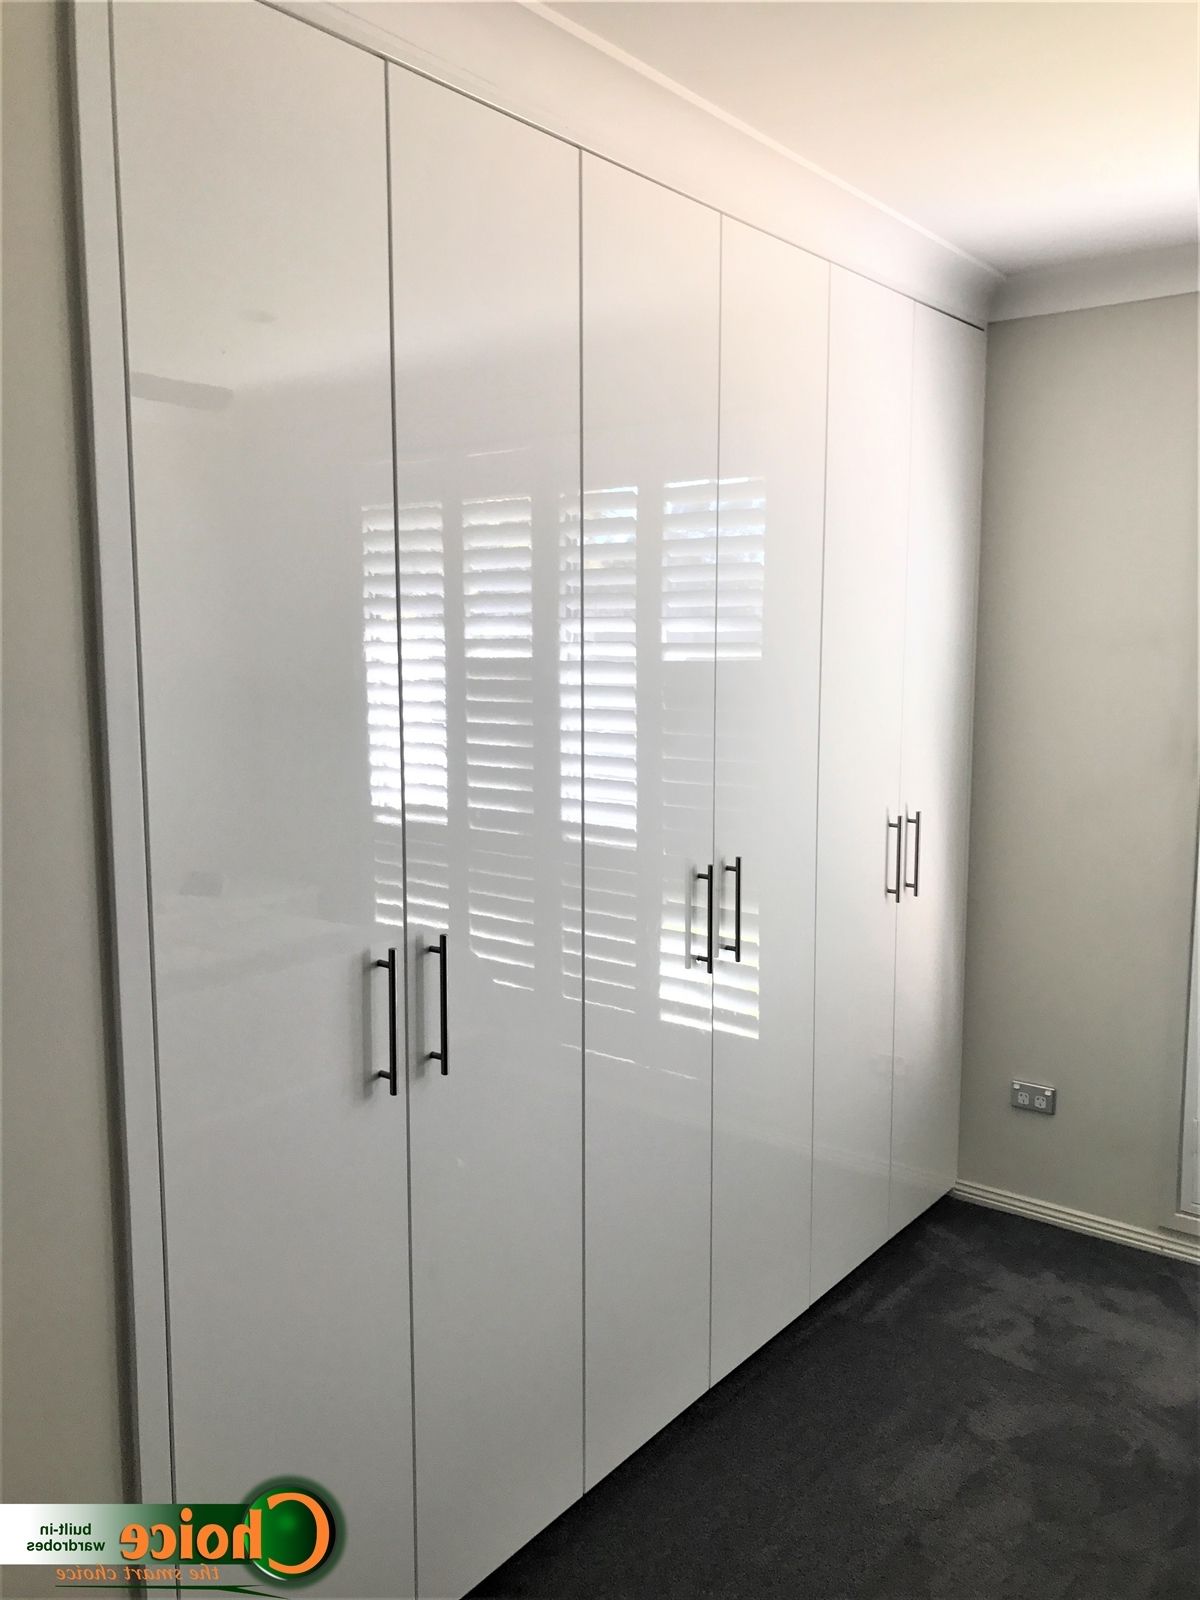 High Gloss White Pollurathane Sliding Doors  Choice Wardrobes | Built In  Wardrobes For Western Sydney  Choice Wardrobes Within White High Gloss Sliding Wardrobes (View 12 of 17)